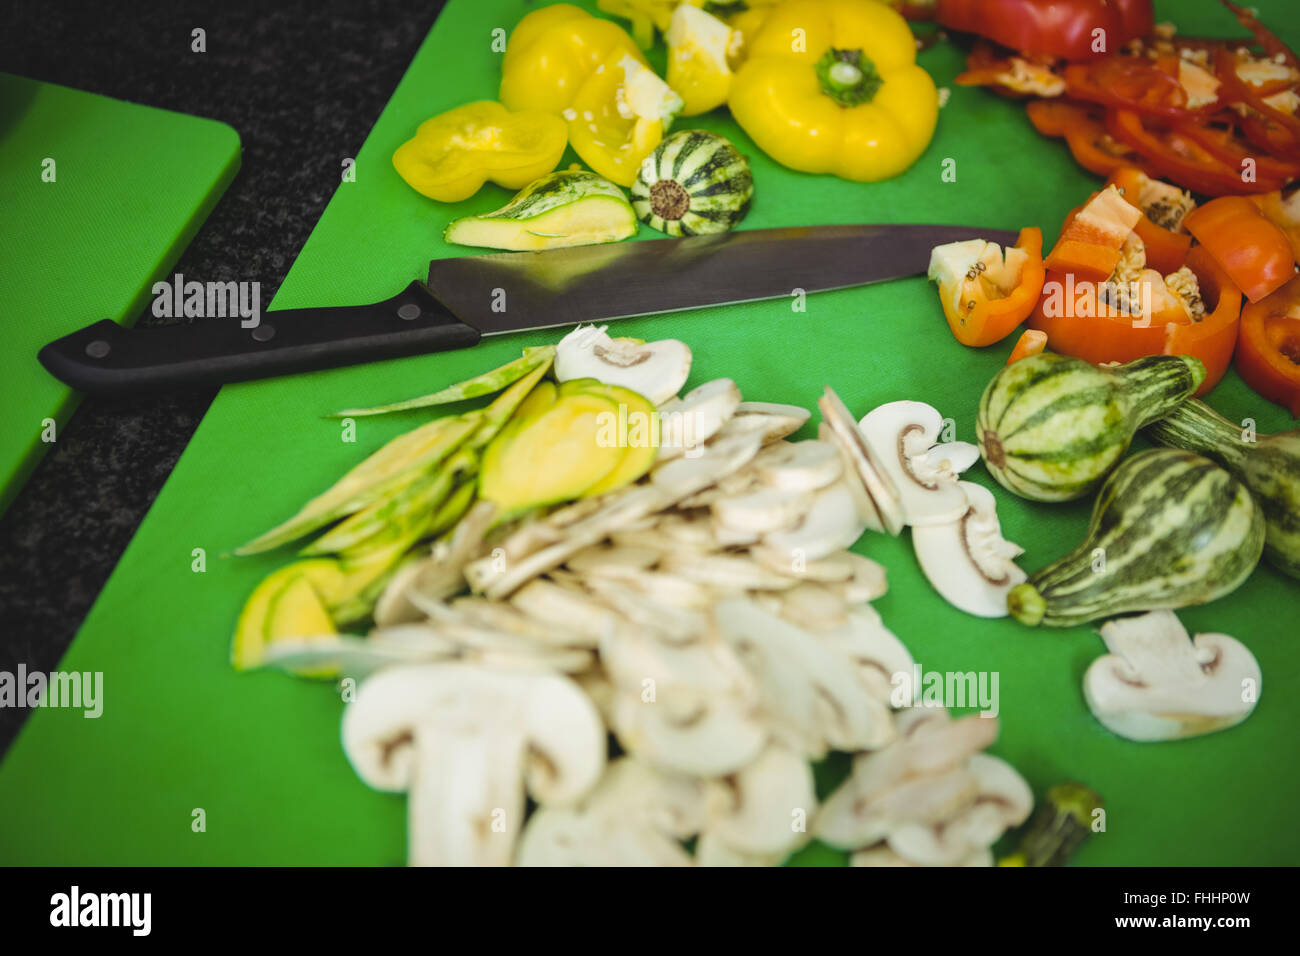 Sliced vegetables on chopping board Stock Photo